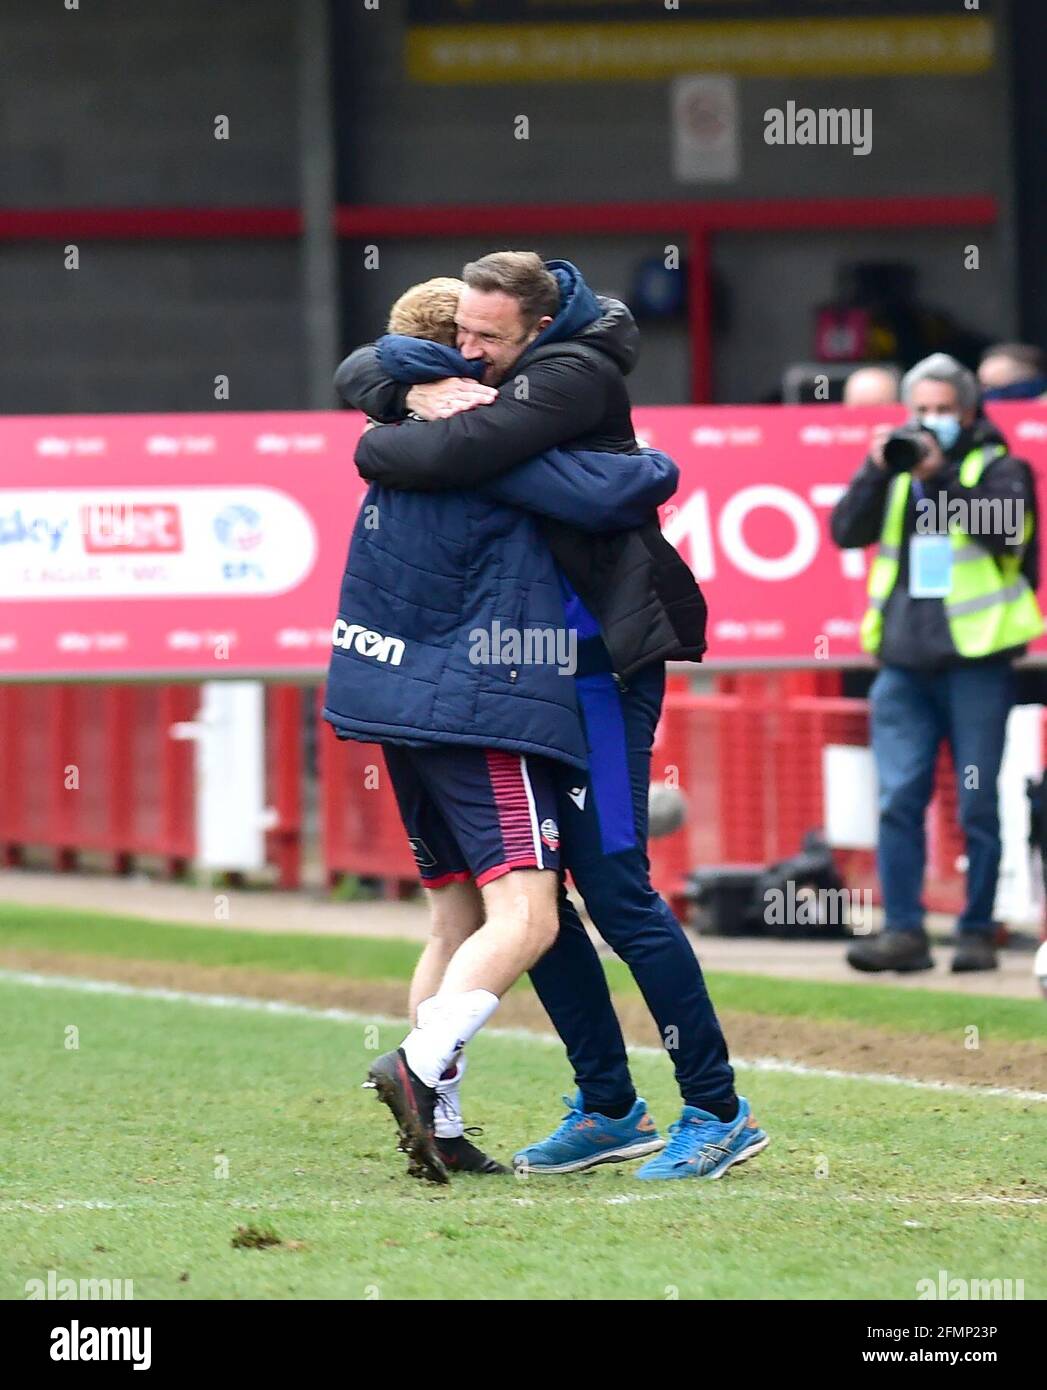 Bolton manager Ian Evatt (rght) celebrates promotion after their win against Crawley in the Sky Bet League Two match between Crawley Town and Bolton Wanderers at the People's Pension Stadium  , Crawley ,  UK - 8th May 2021 Photo Simon Dack / Telephoto Images.  -  EDITORIAL USE ONLY No use with unauthorised audio, video, data, fixture lists, club/league logos or “live” services. Online in-match use limited to 120 images, no video emulation. No use in betting, games or single club/league/player publications Stock Photo